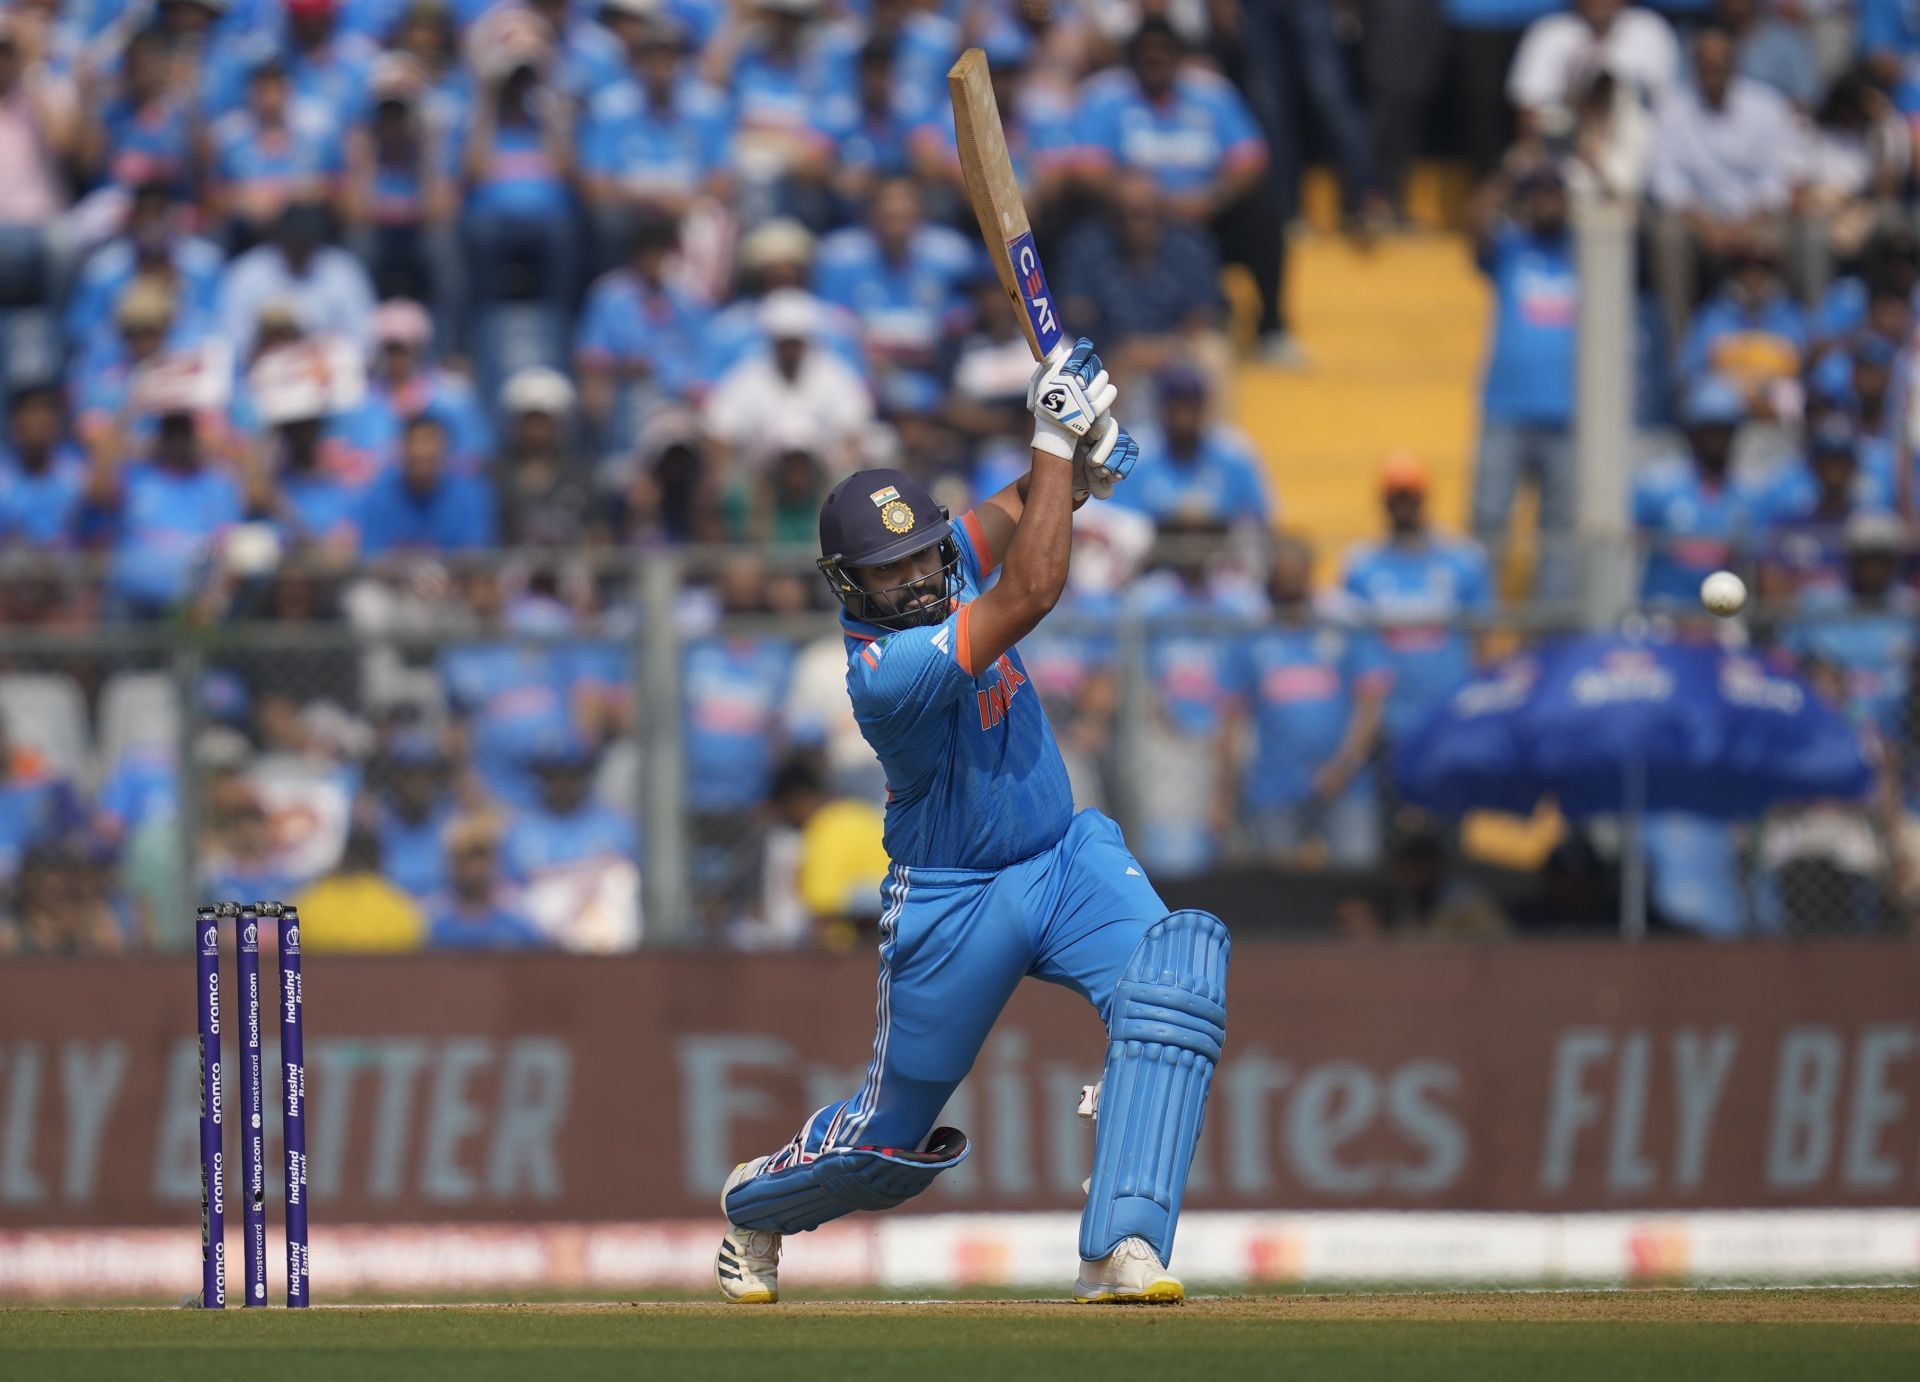 Rohit Sharma smashed 47 runs off 29 deliveries in the semifinal. [P/C: AP]